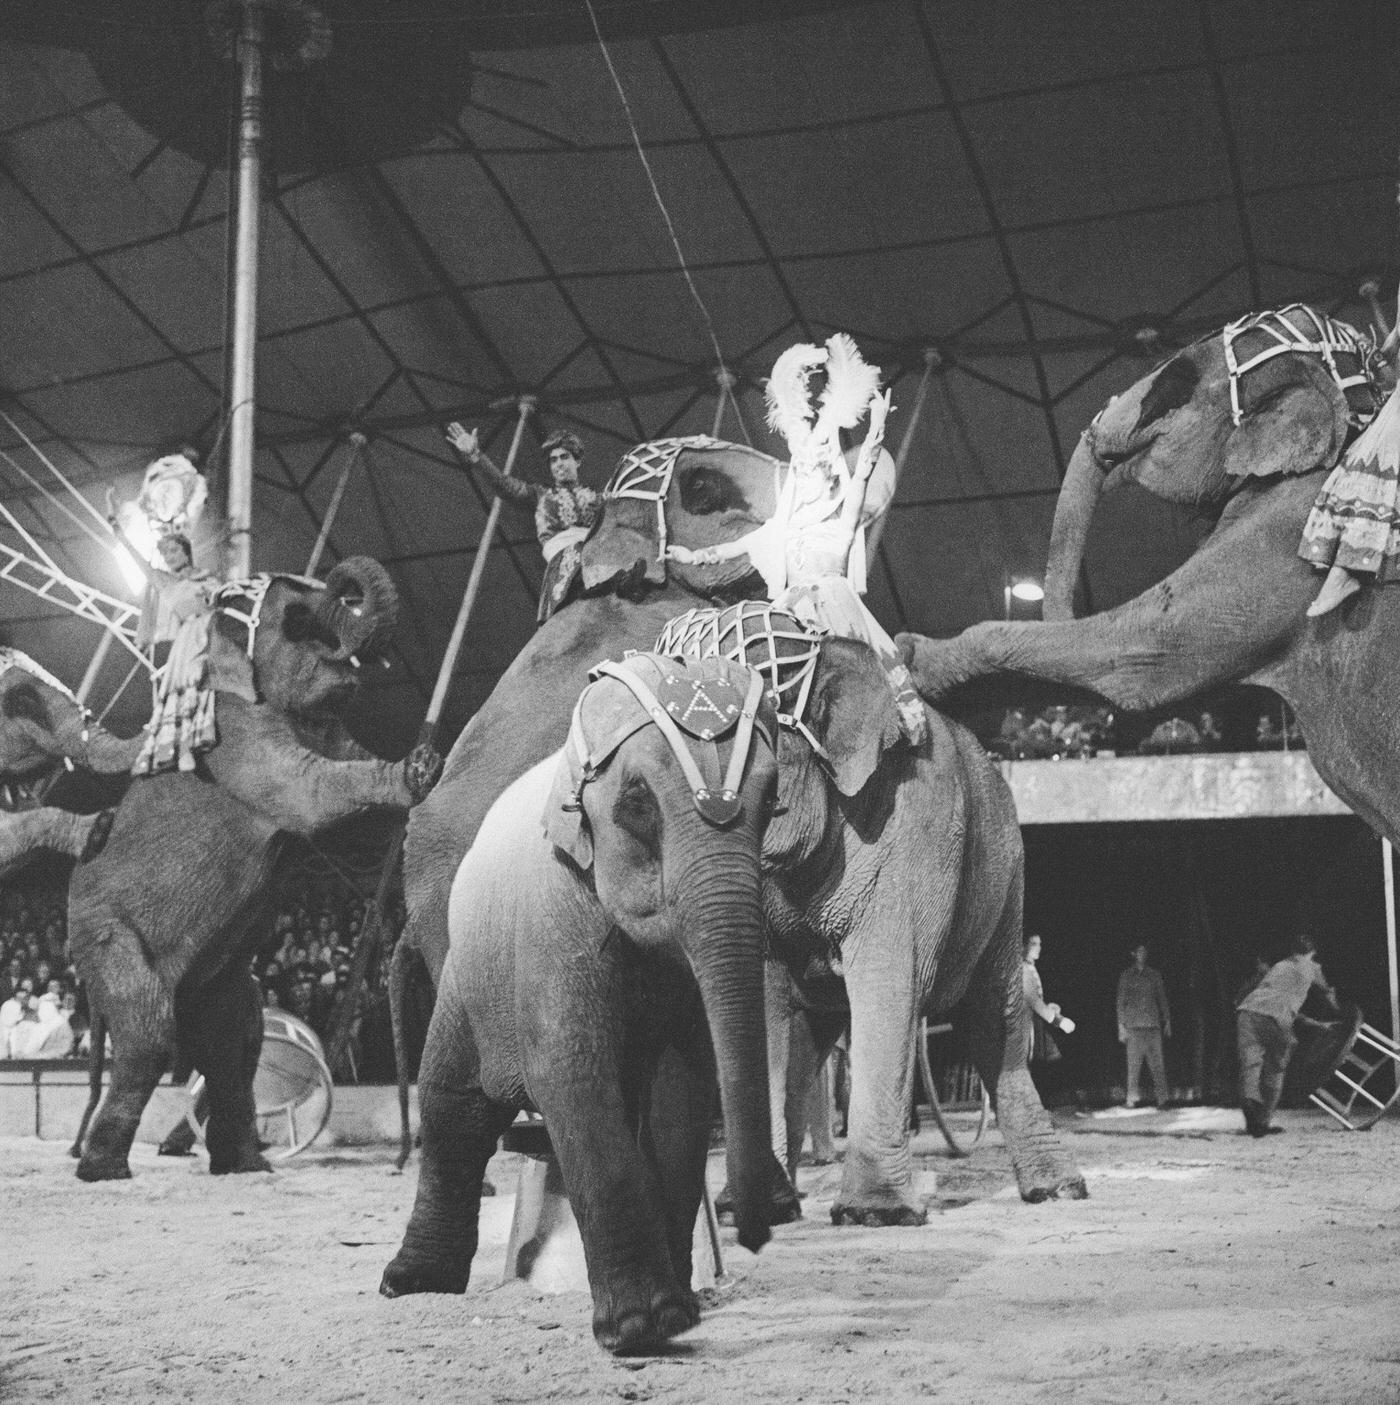 A show in Circus Rebernigg in Vienna, photographed in April 1956.